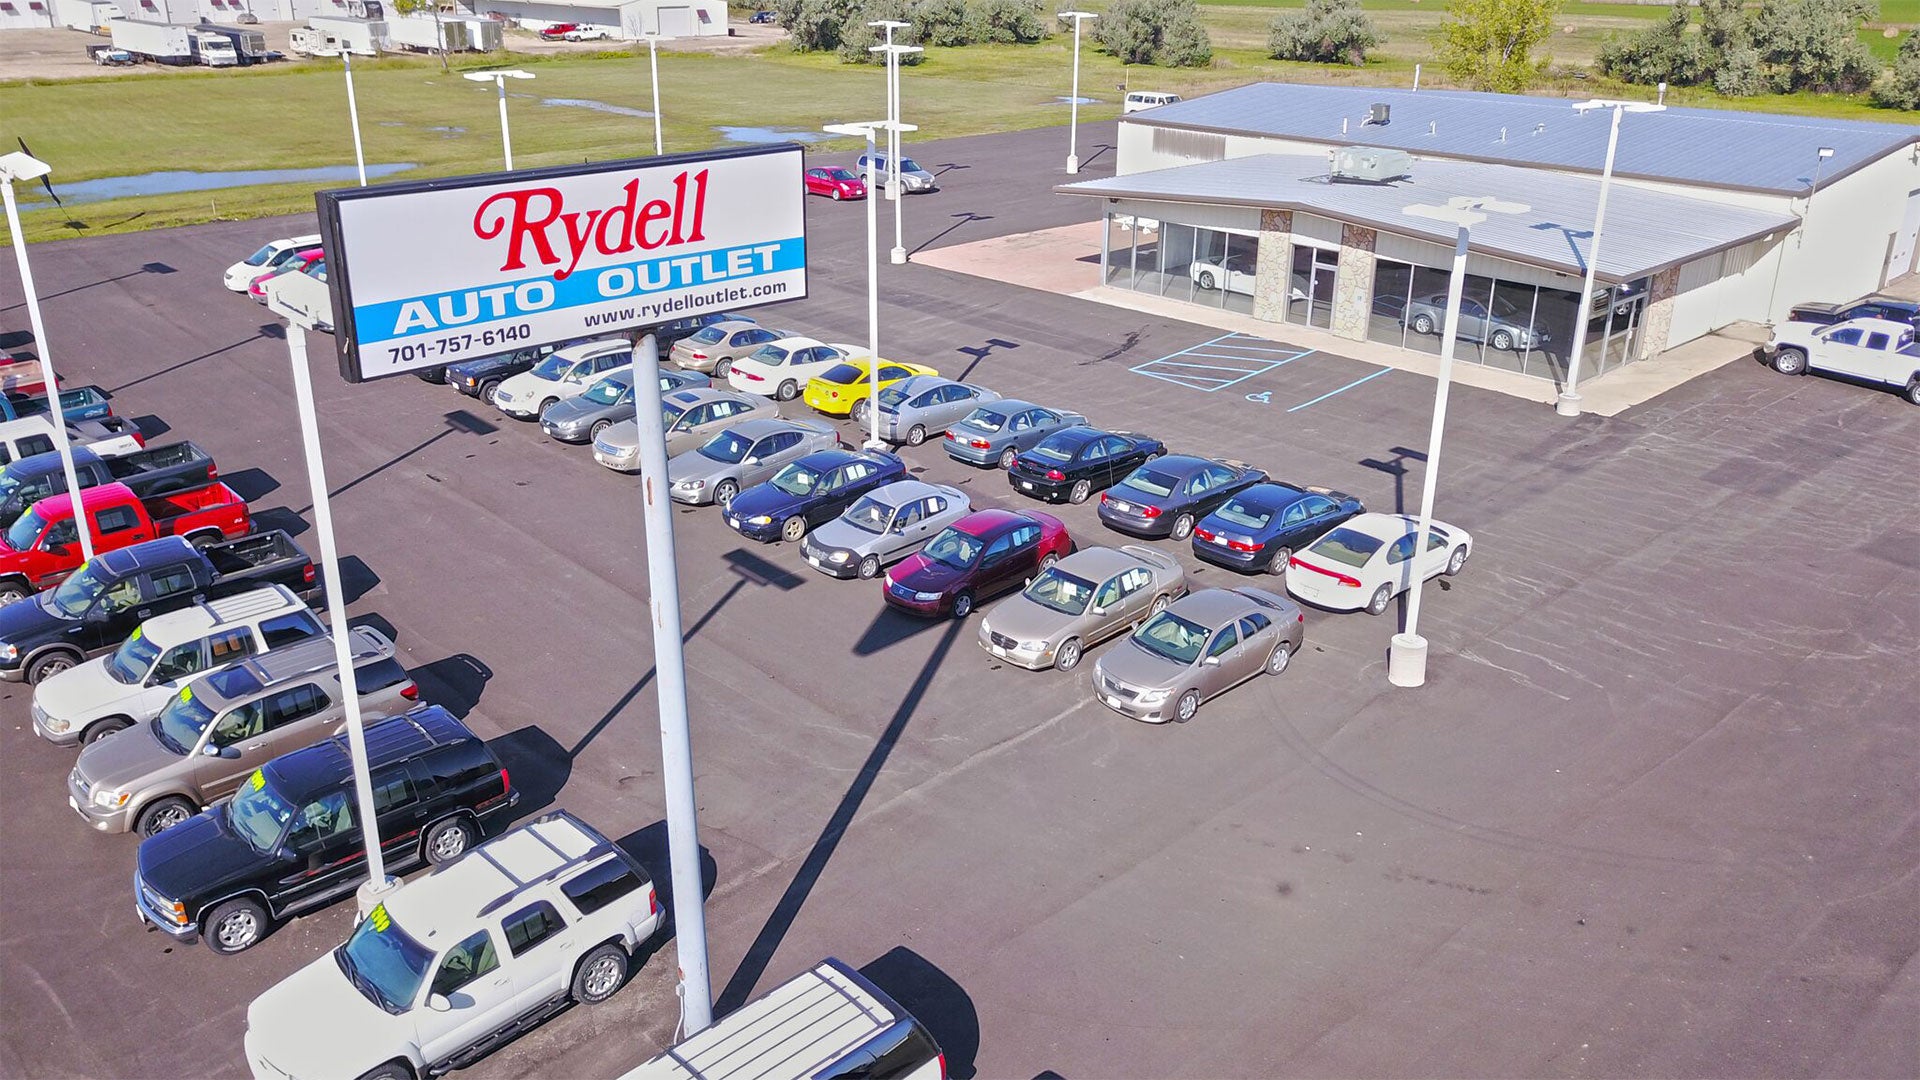 Rydell Auto Outlet